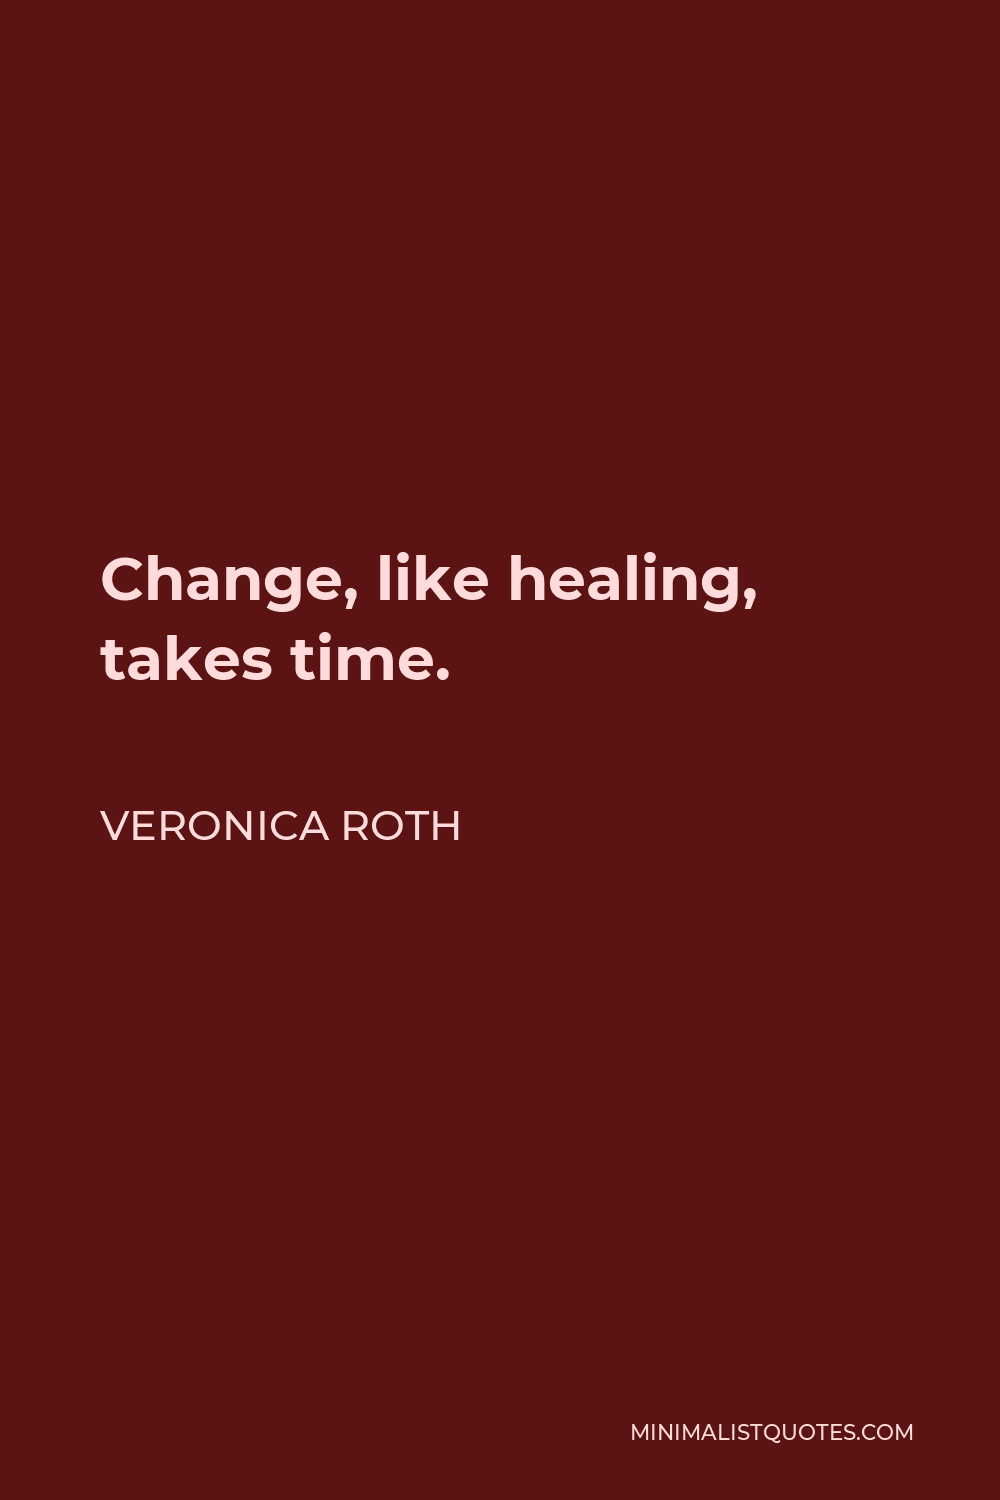 Veronica Roth Quote - Change, like healing, takes time.